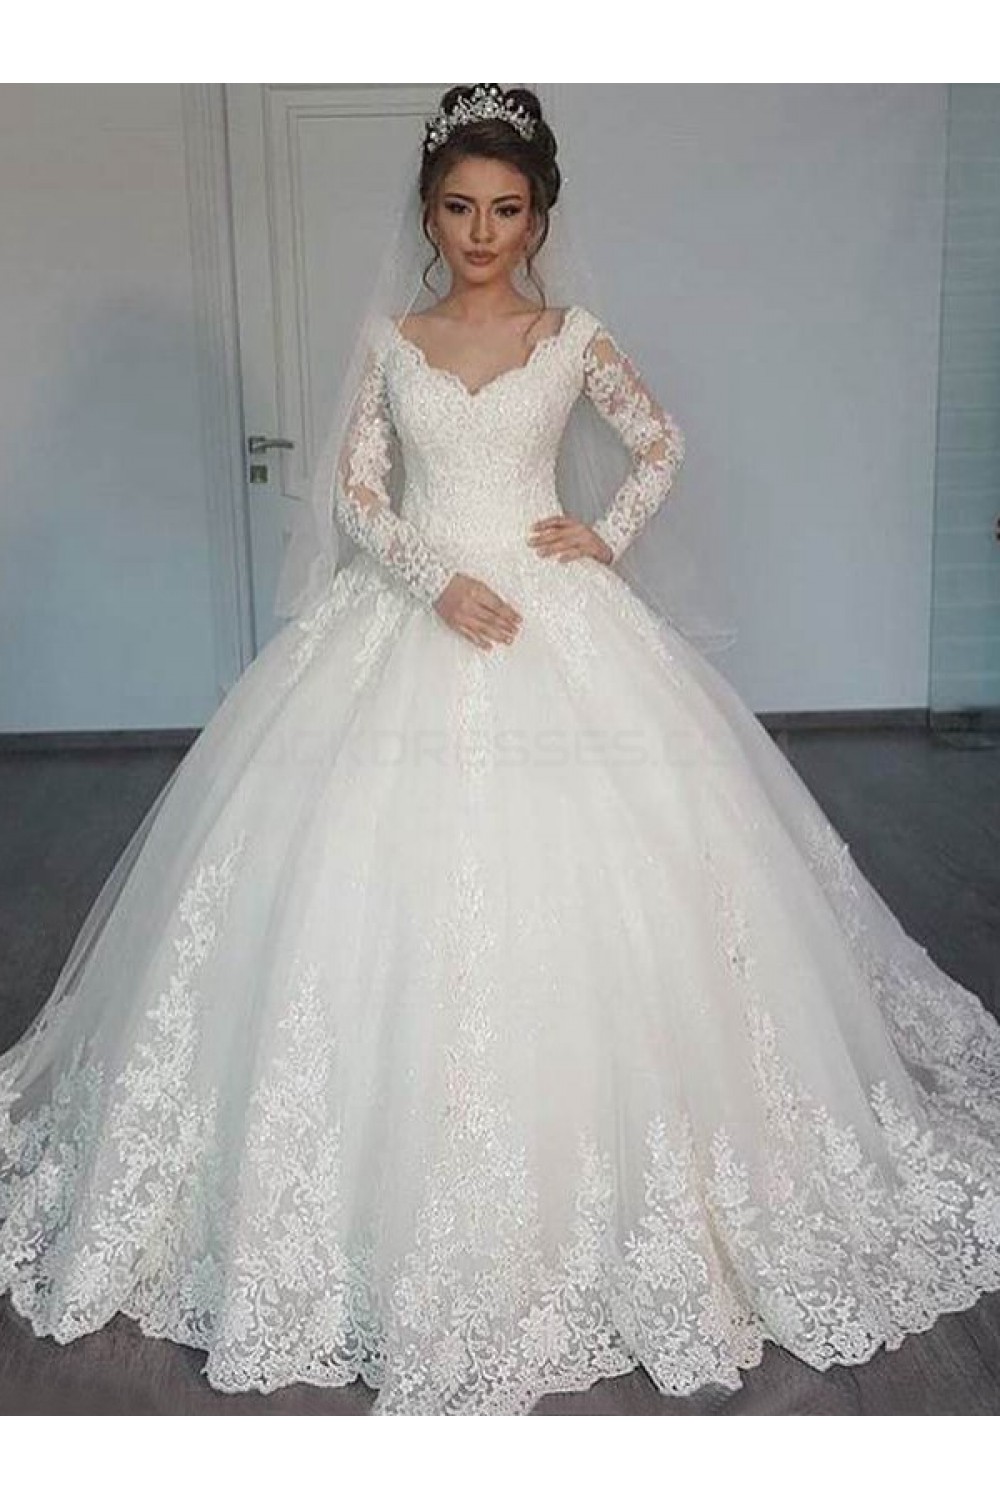 Bridal Ball Gown V Neck Lace Long Sleeves Wedding Dresses Bridal Gowns 3030126 6308